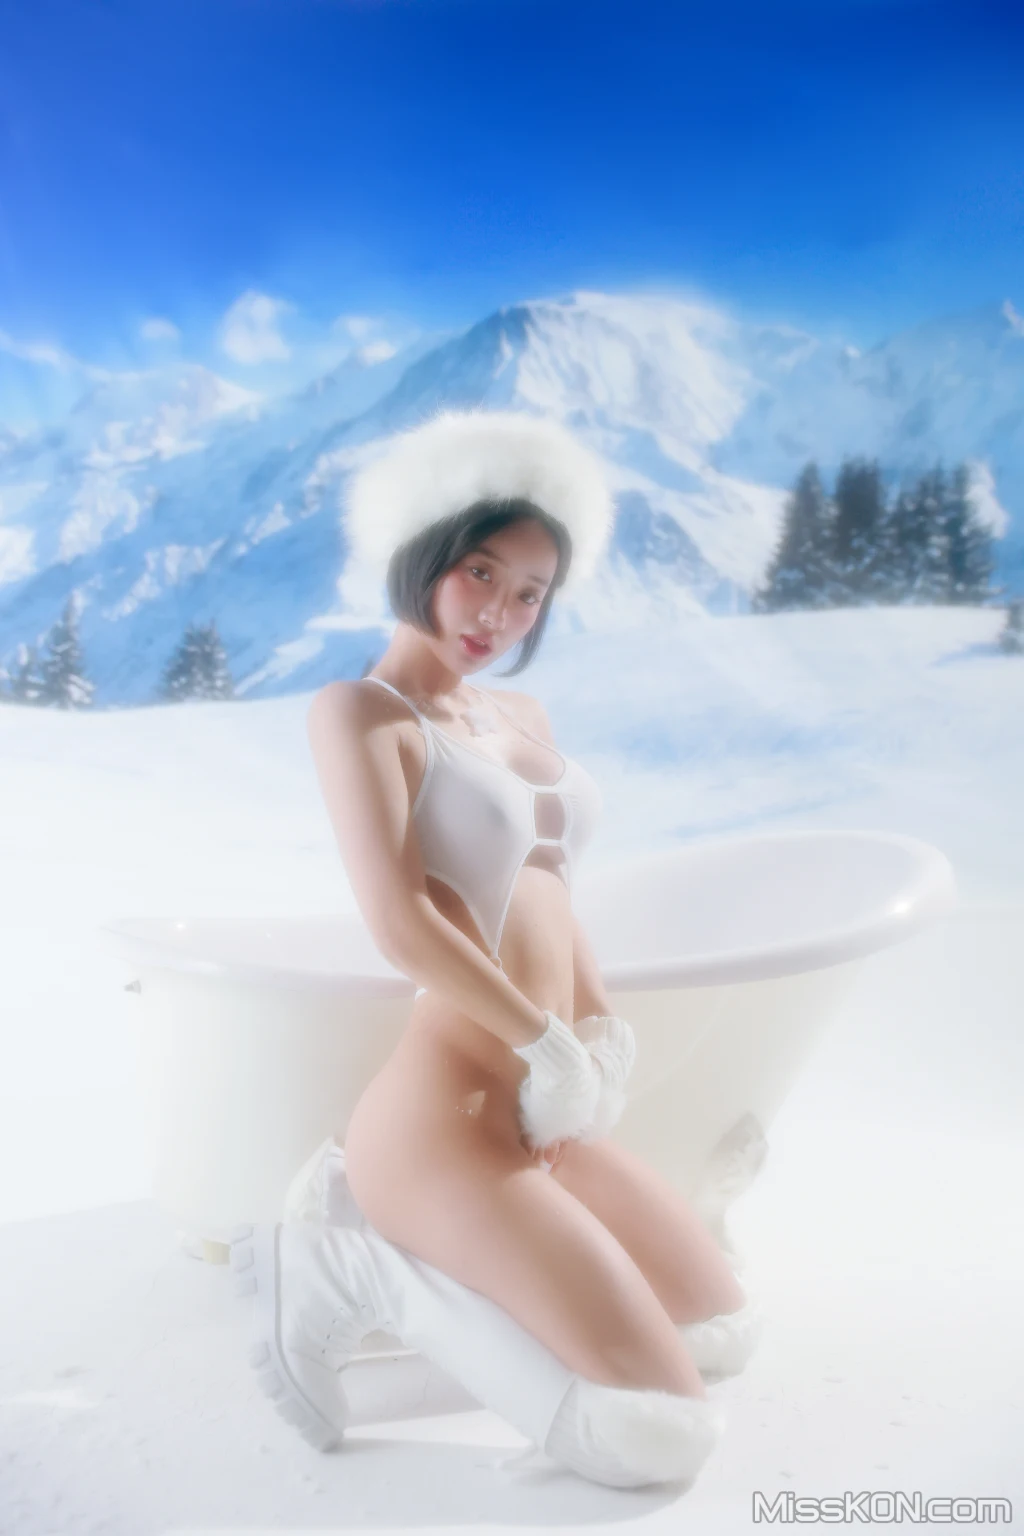 [Pinkpie] Booty Queen Vol.1: The Hot Body of a Lost Girl in Snow Garden (50 图 + 1 视频) –插图7